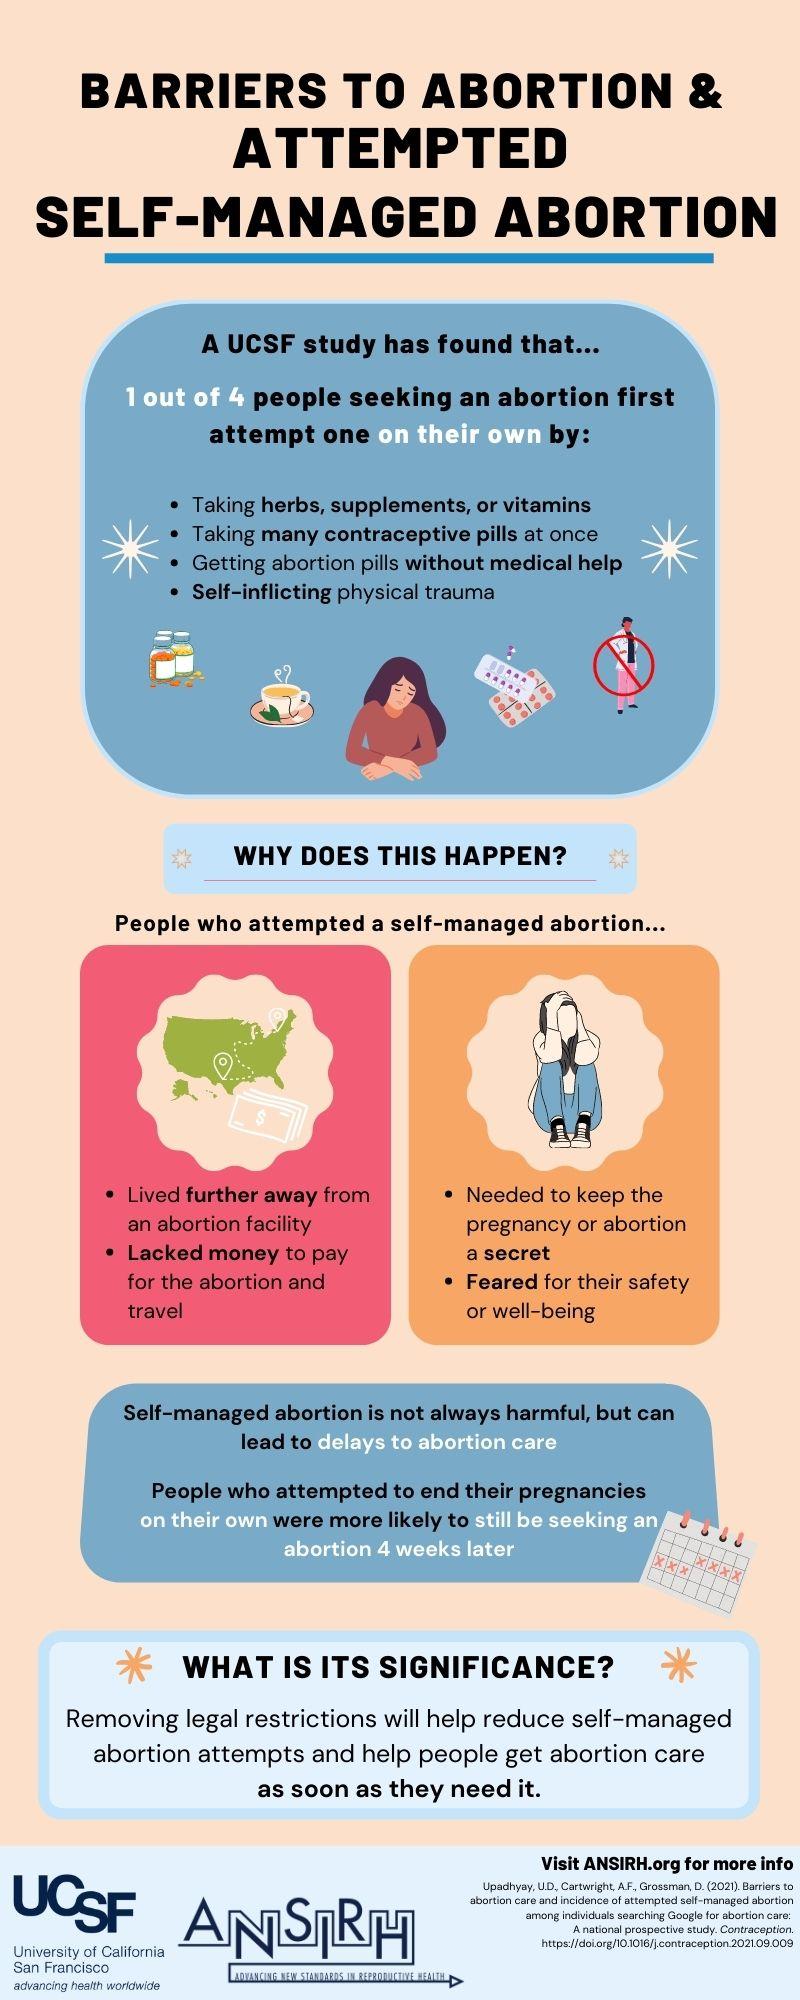 An infographic on barriers to abortion care and attempted self-managed abortion.